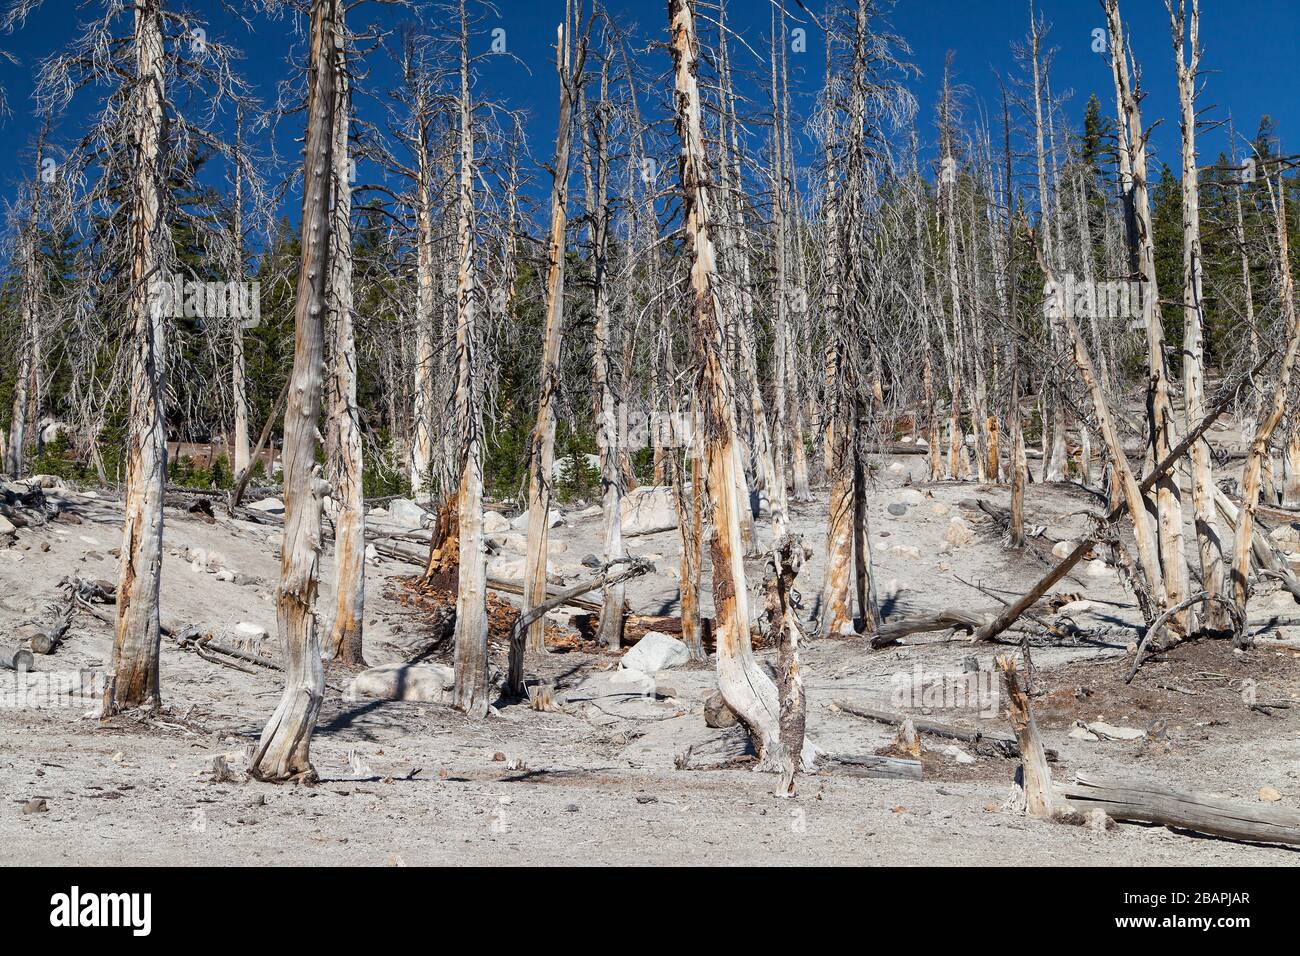 Dead trees caused by carbon dioxide emissions at Mammoth Mountain, Mammoth Lakes, California, USA. Stock Photo